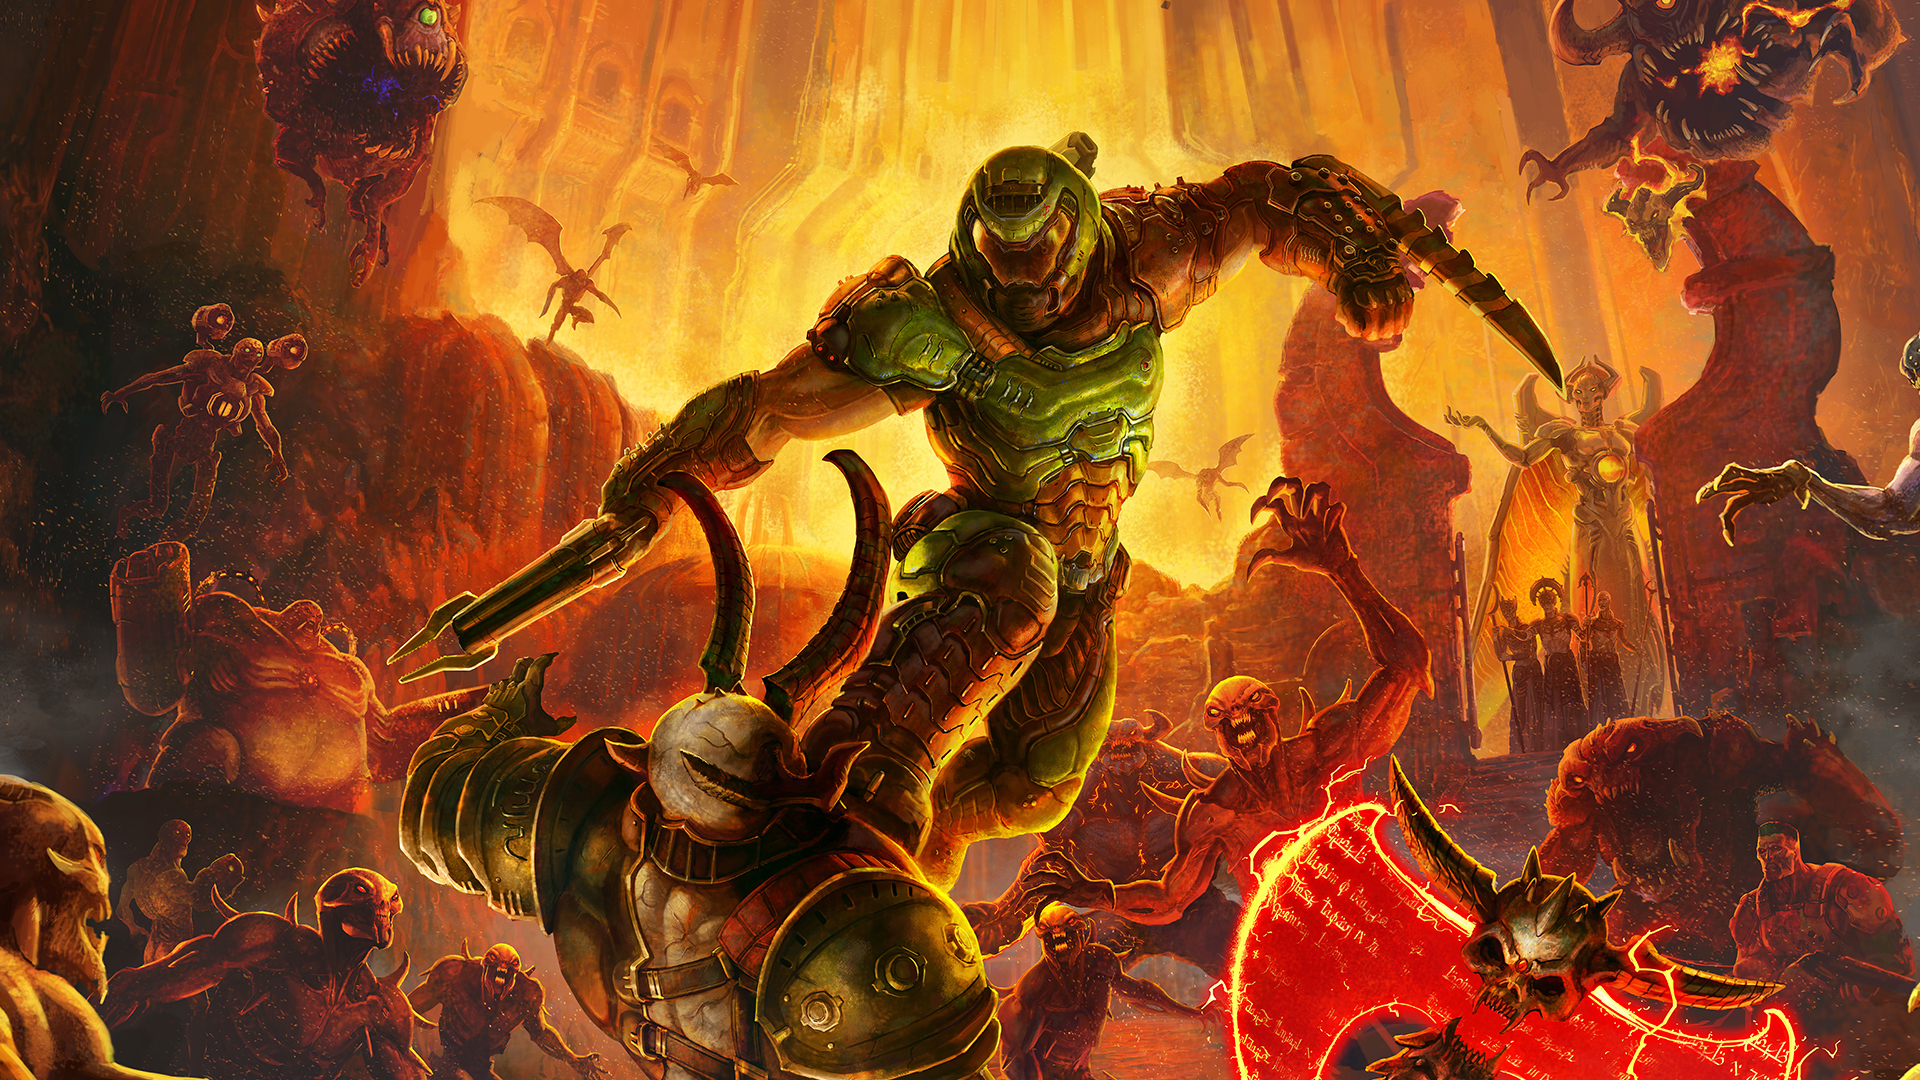  The next Doom game will be titled Doom: The Dark Ages and revealed at Xbox Games Showcase, report claims  